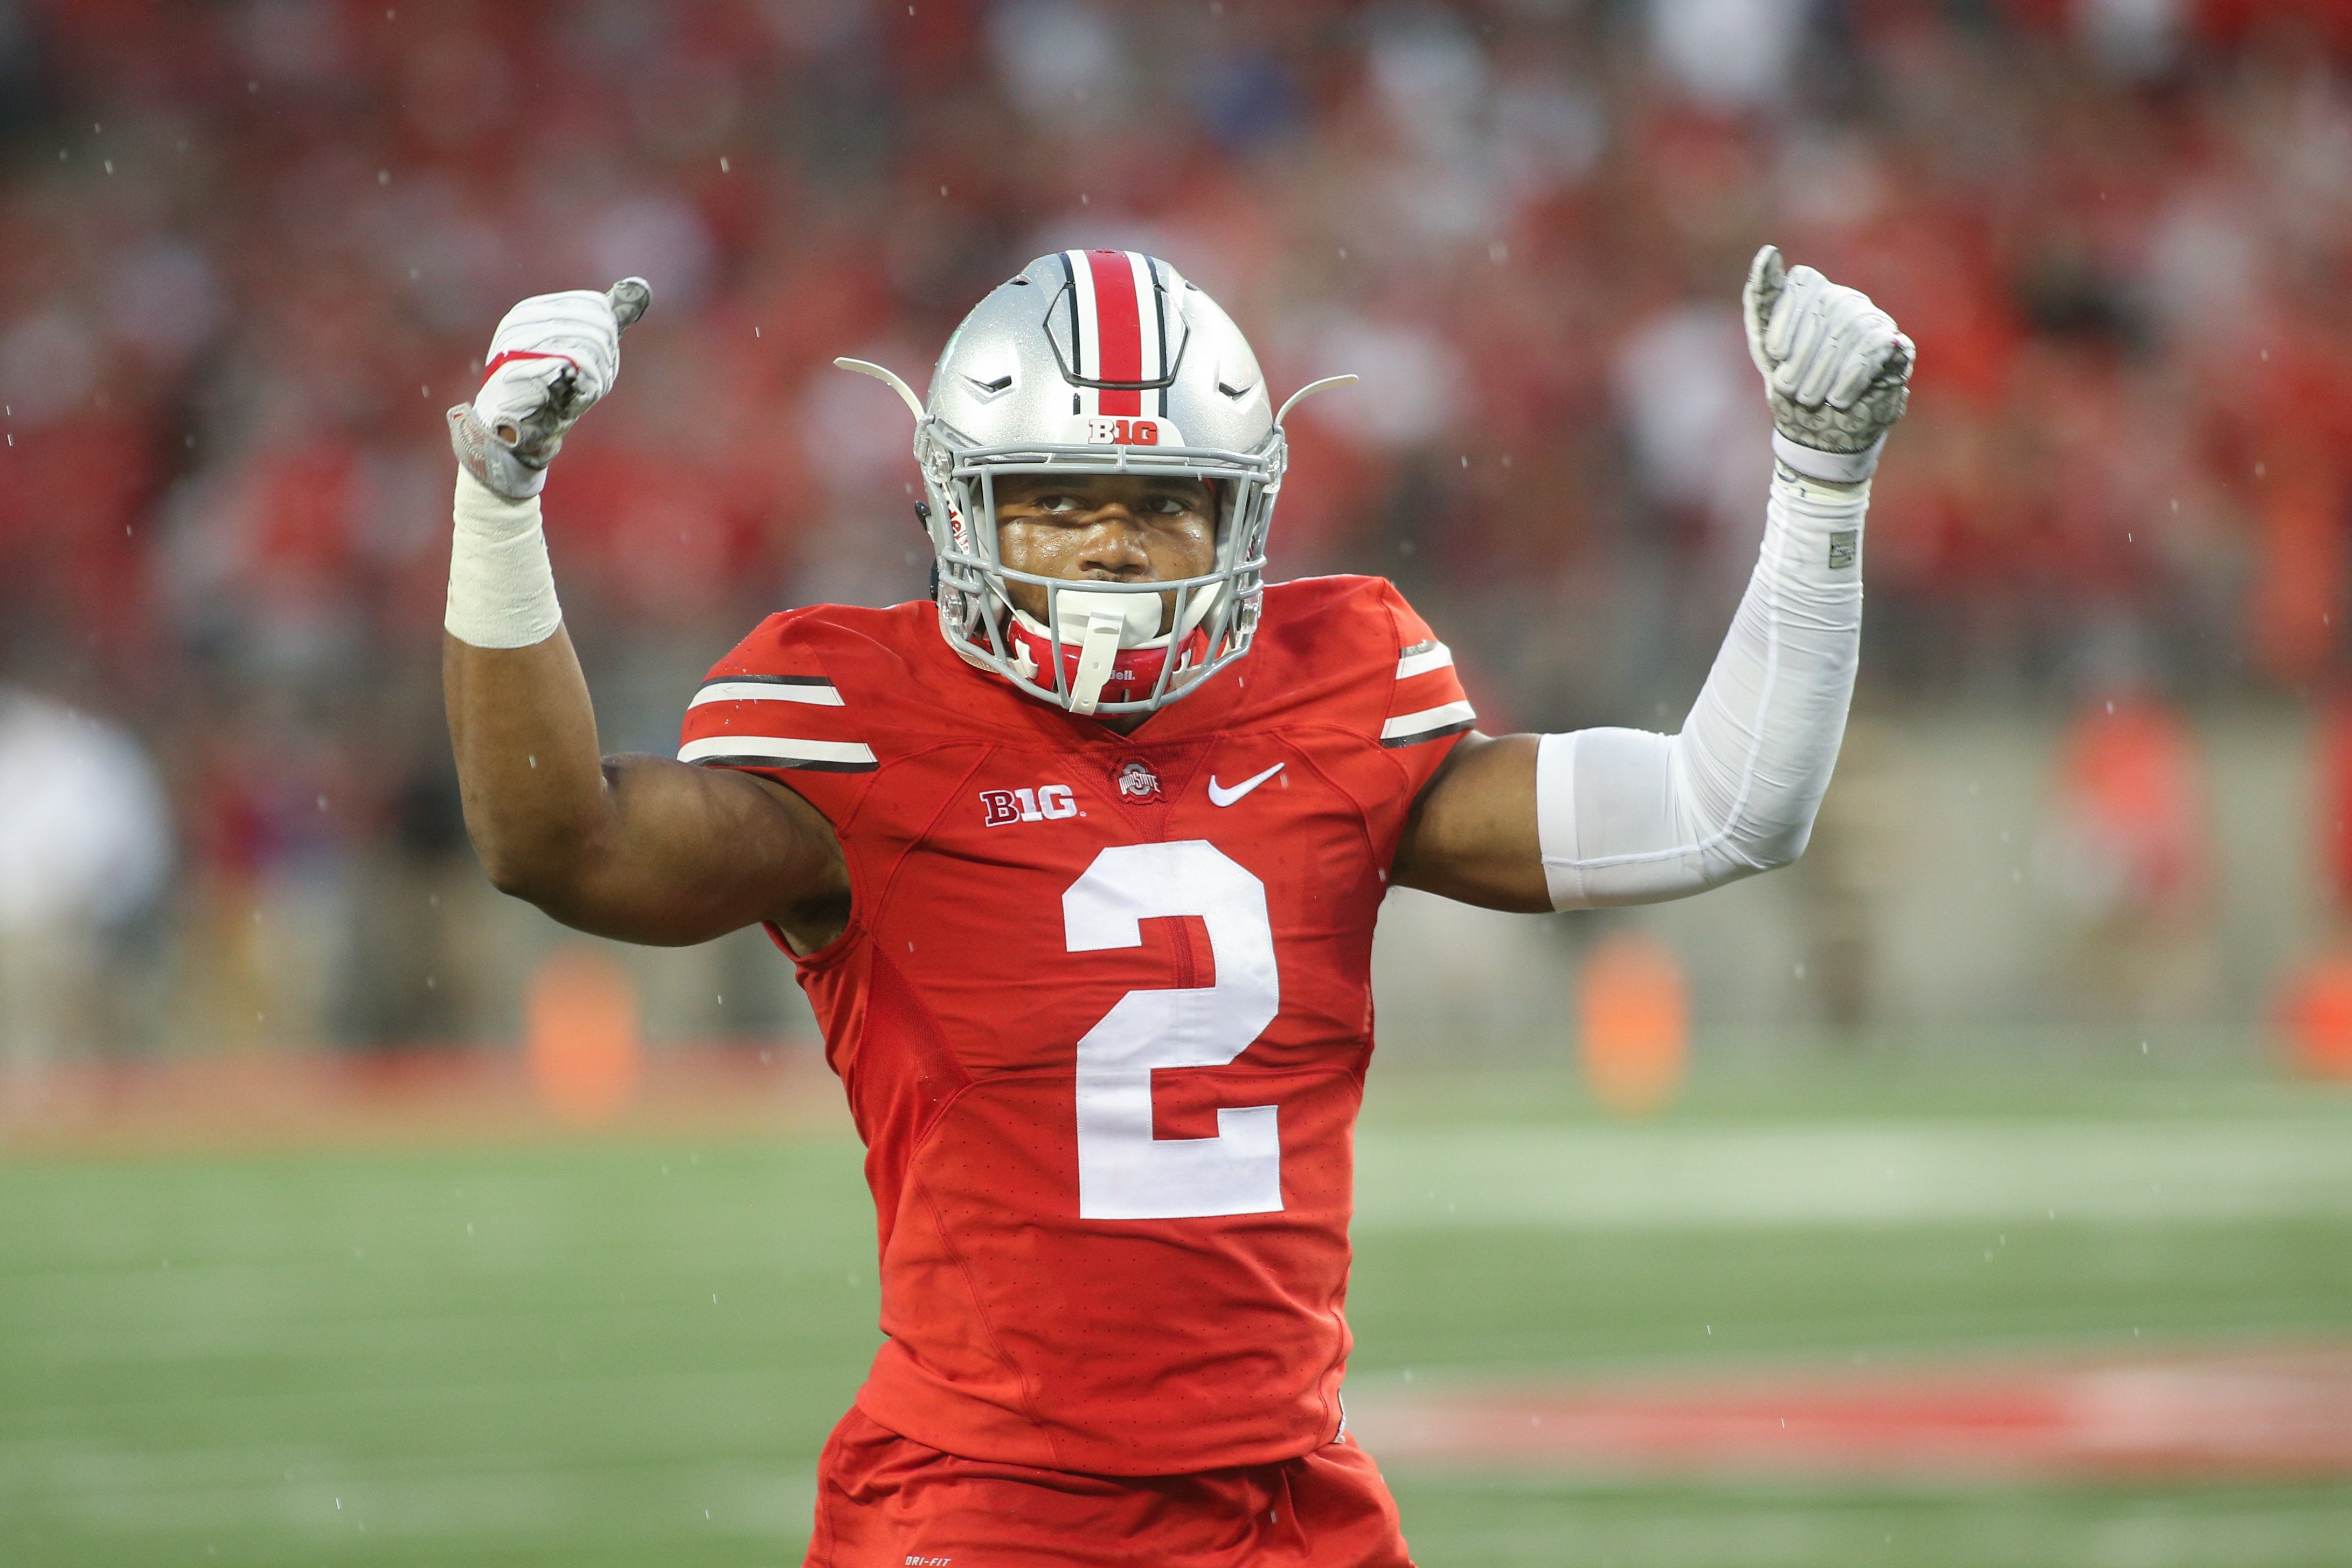 Denzel Ward has all the tools to be Ohio State's next No. 1 corner